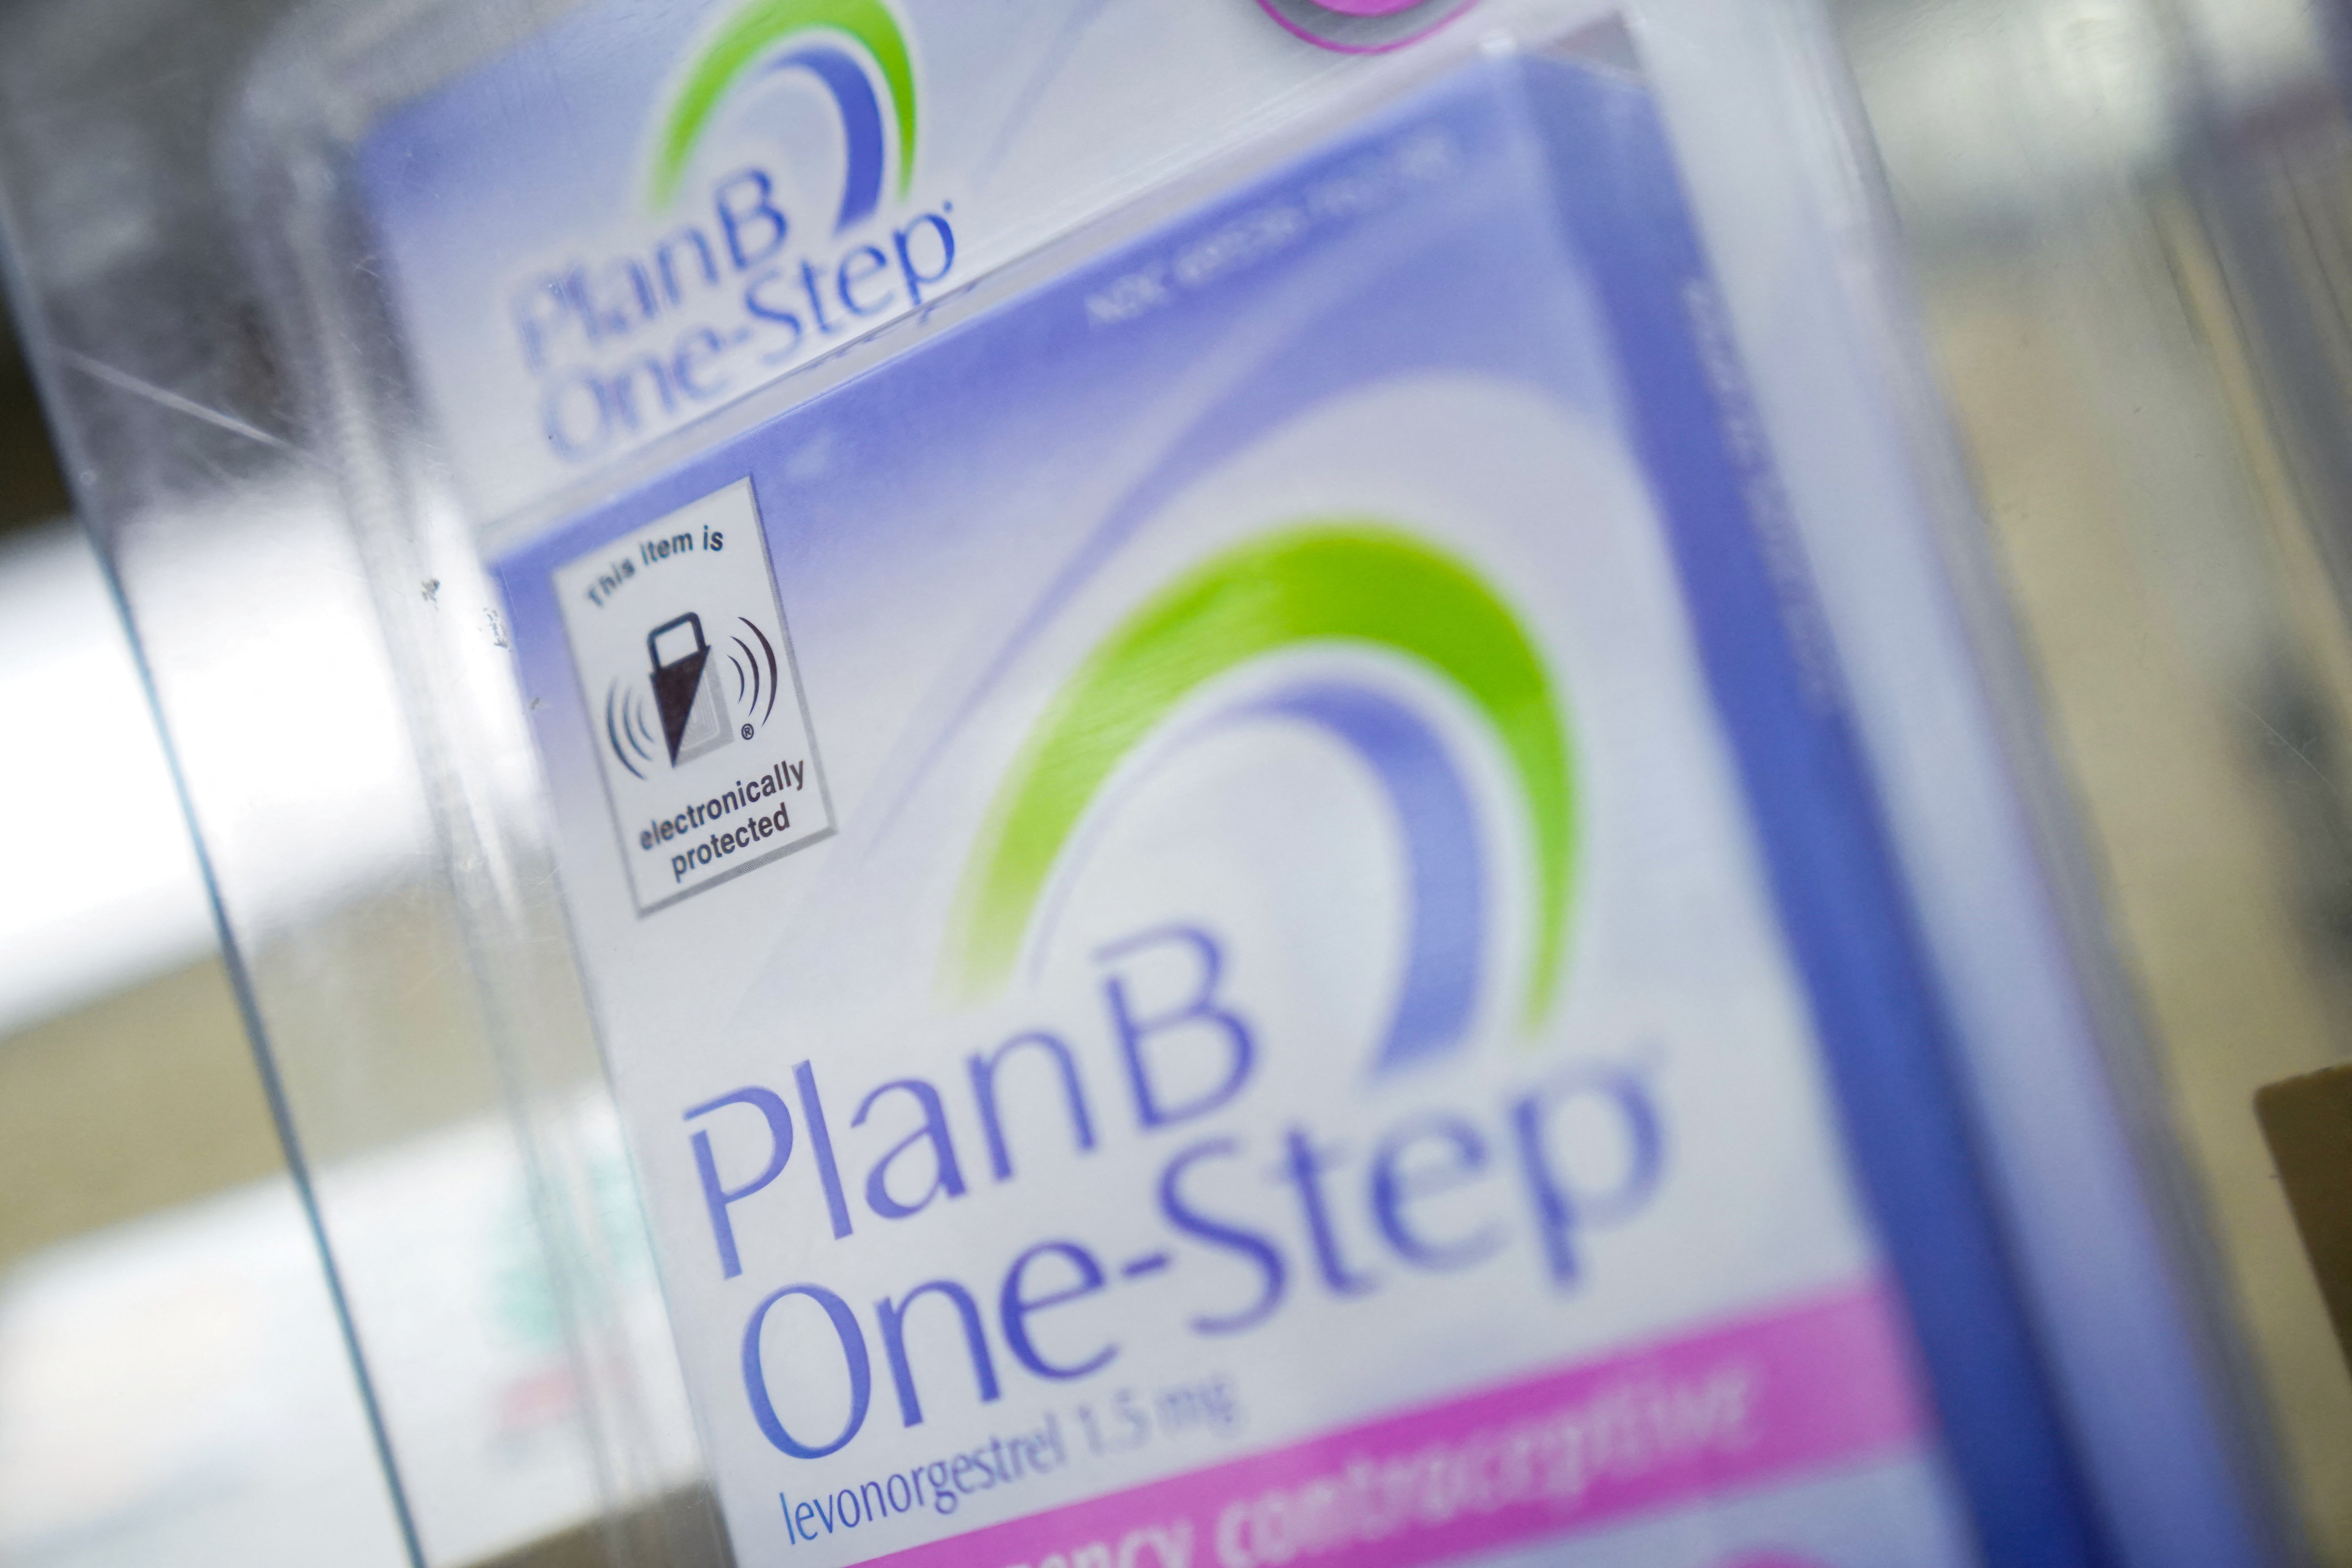 Plan B Emergency Contraception: Where to Get It, Purchase Limits